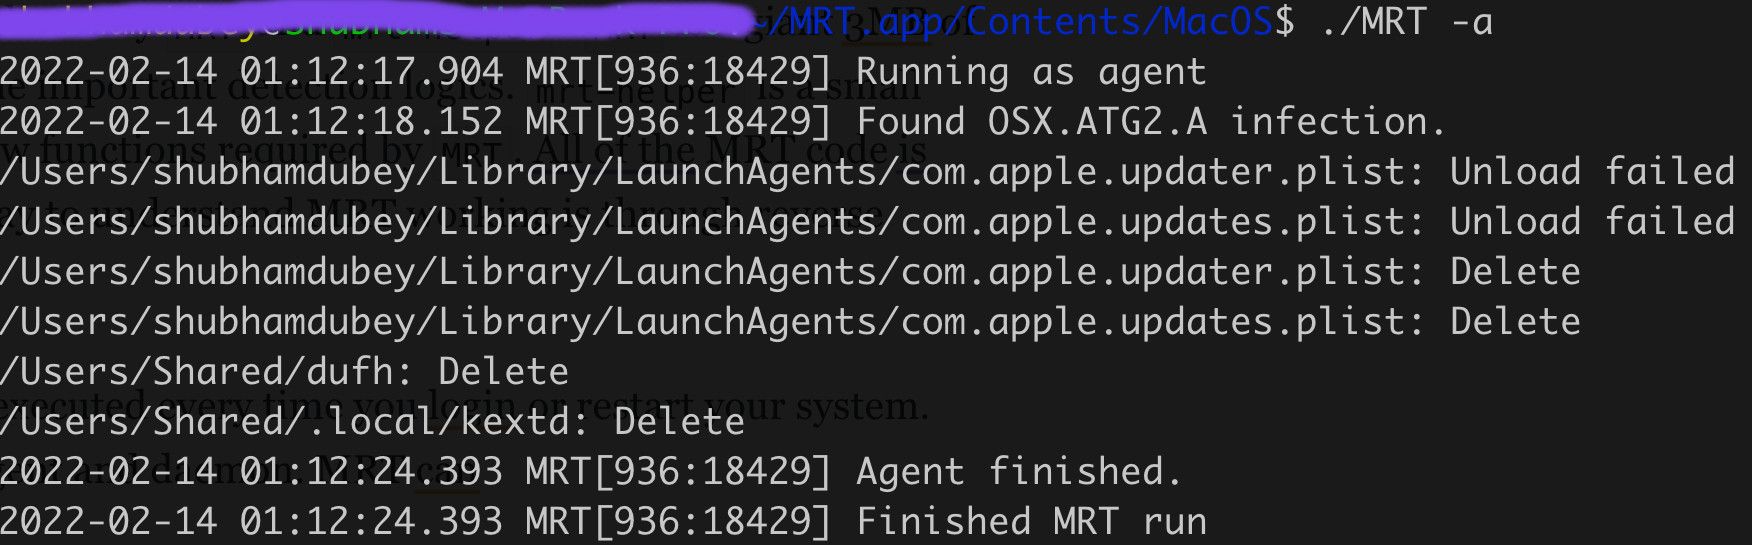 Uncovering the security protections in MAC - XProtect and MRT